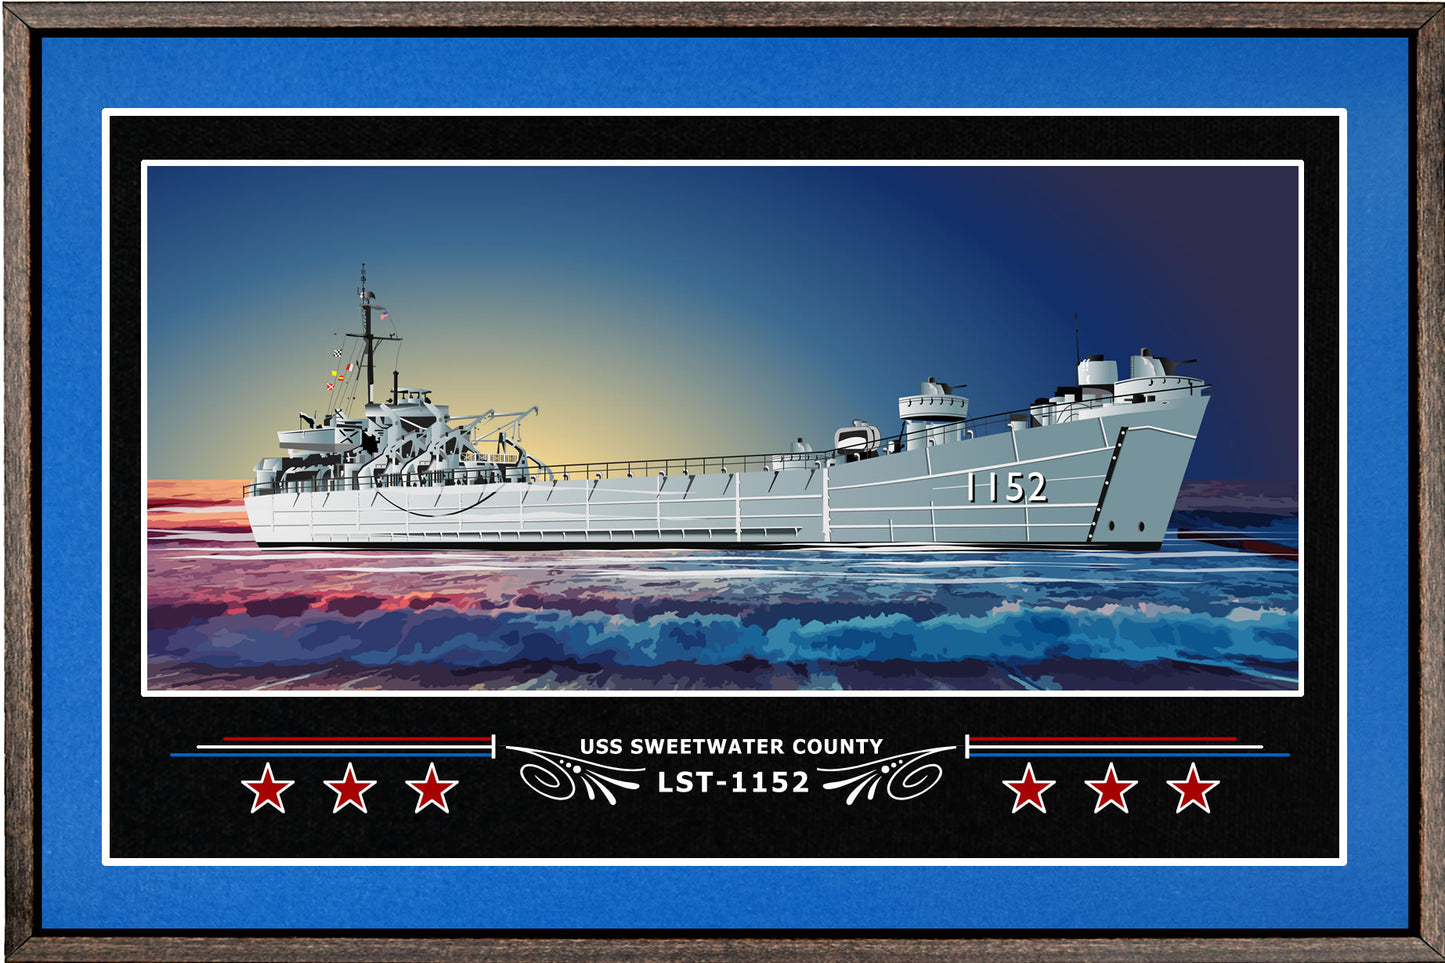 USS SWEETWATER COUNTY LST 1152 BOX FRAMED CANVAS ART BLUE